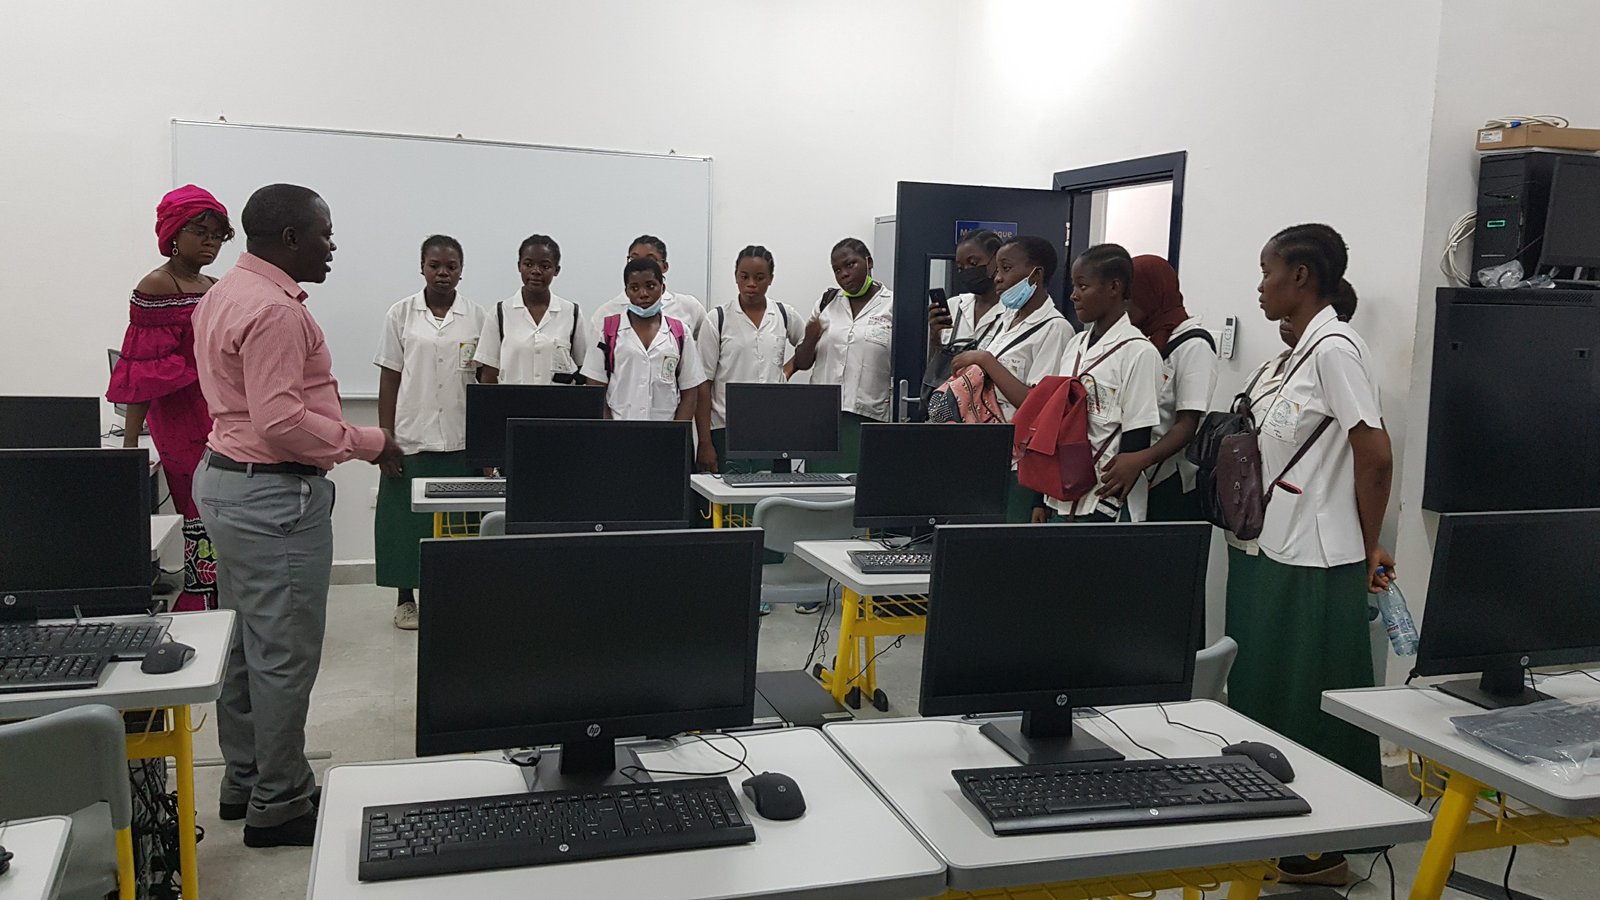 Visit to ISHOPE by students from the Akwa Technical High School